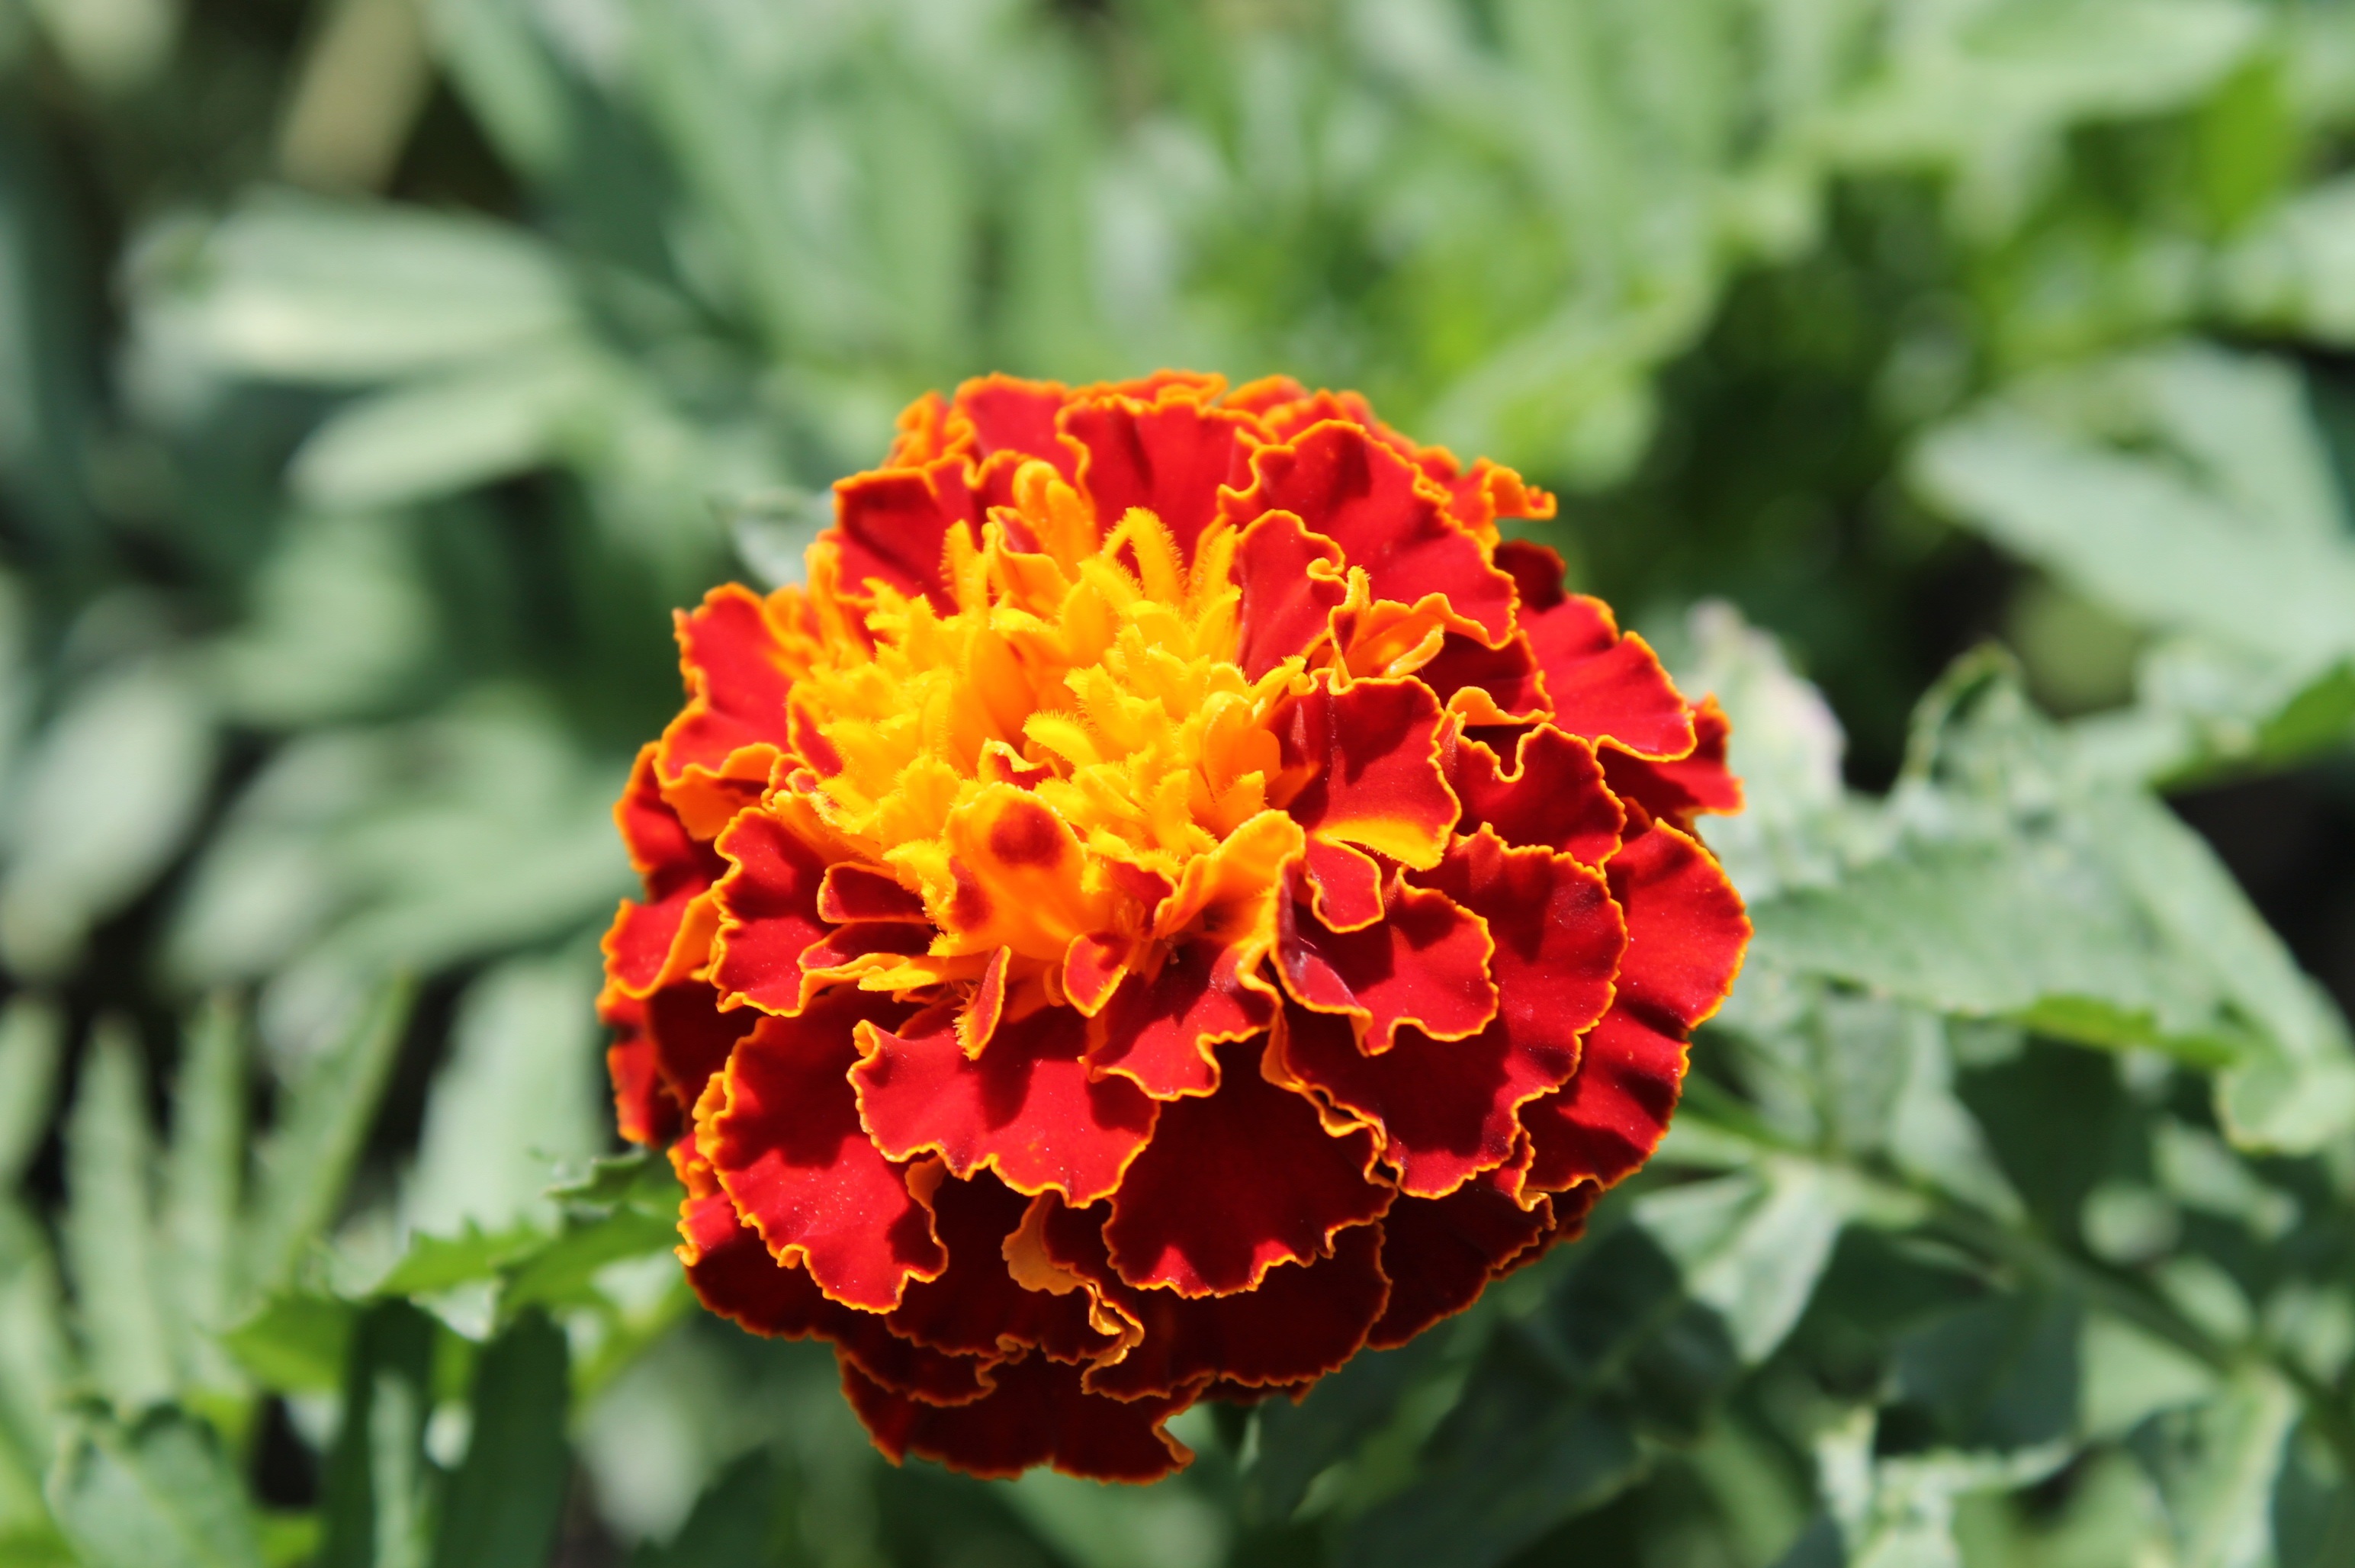 French marigold flower close up free image download